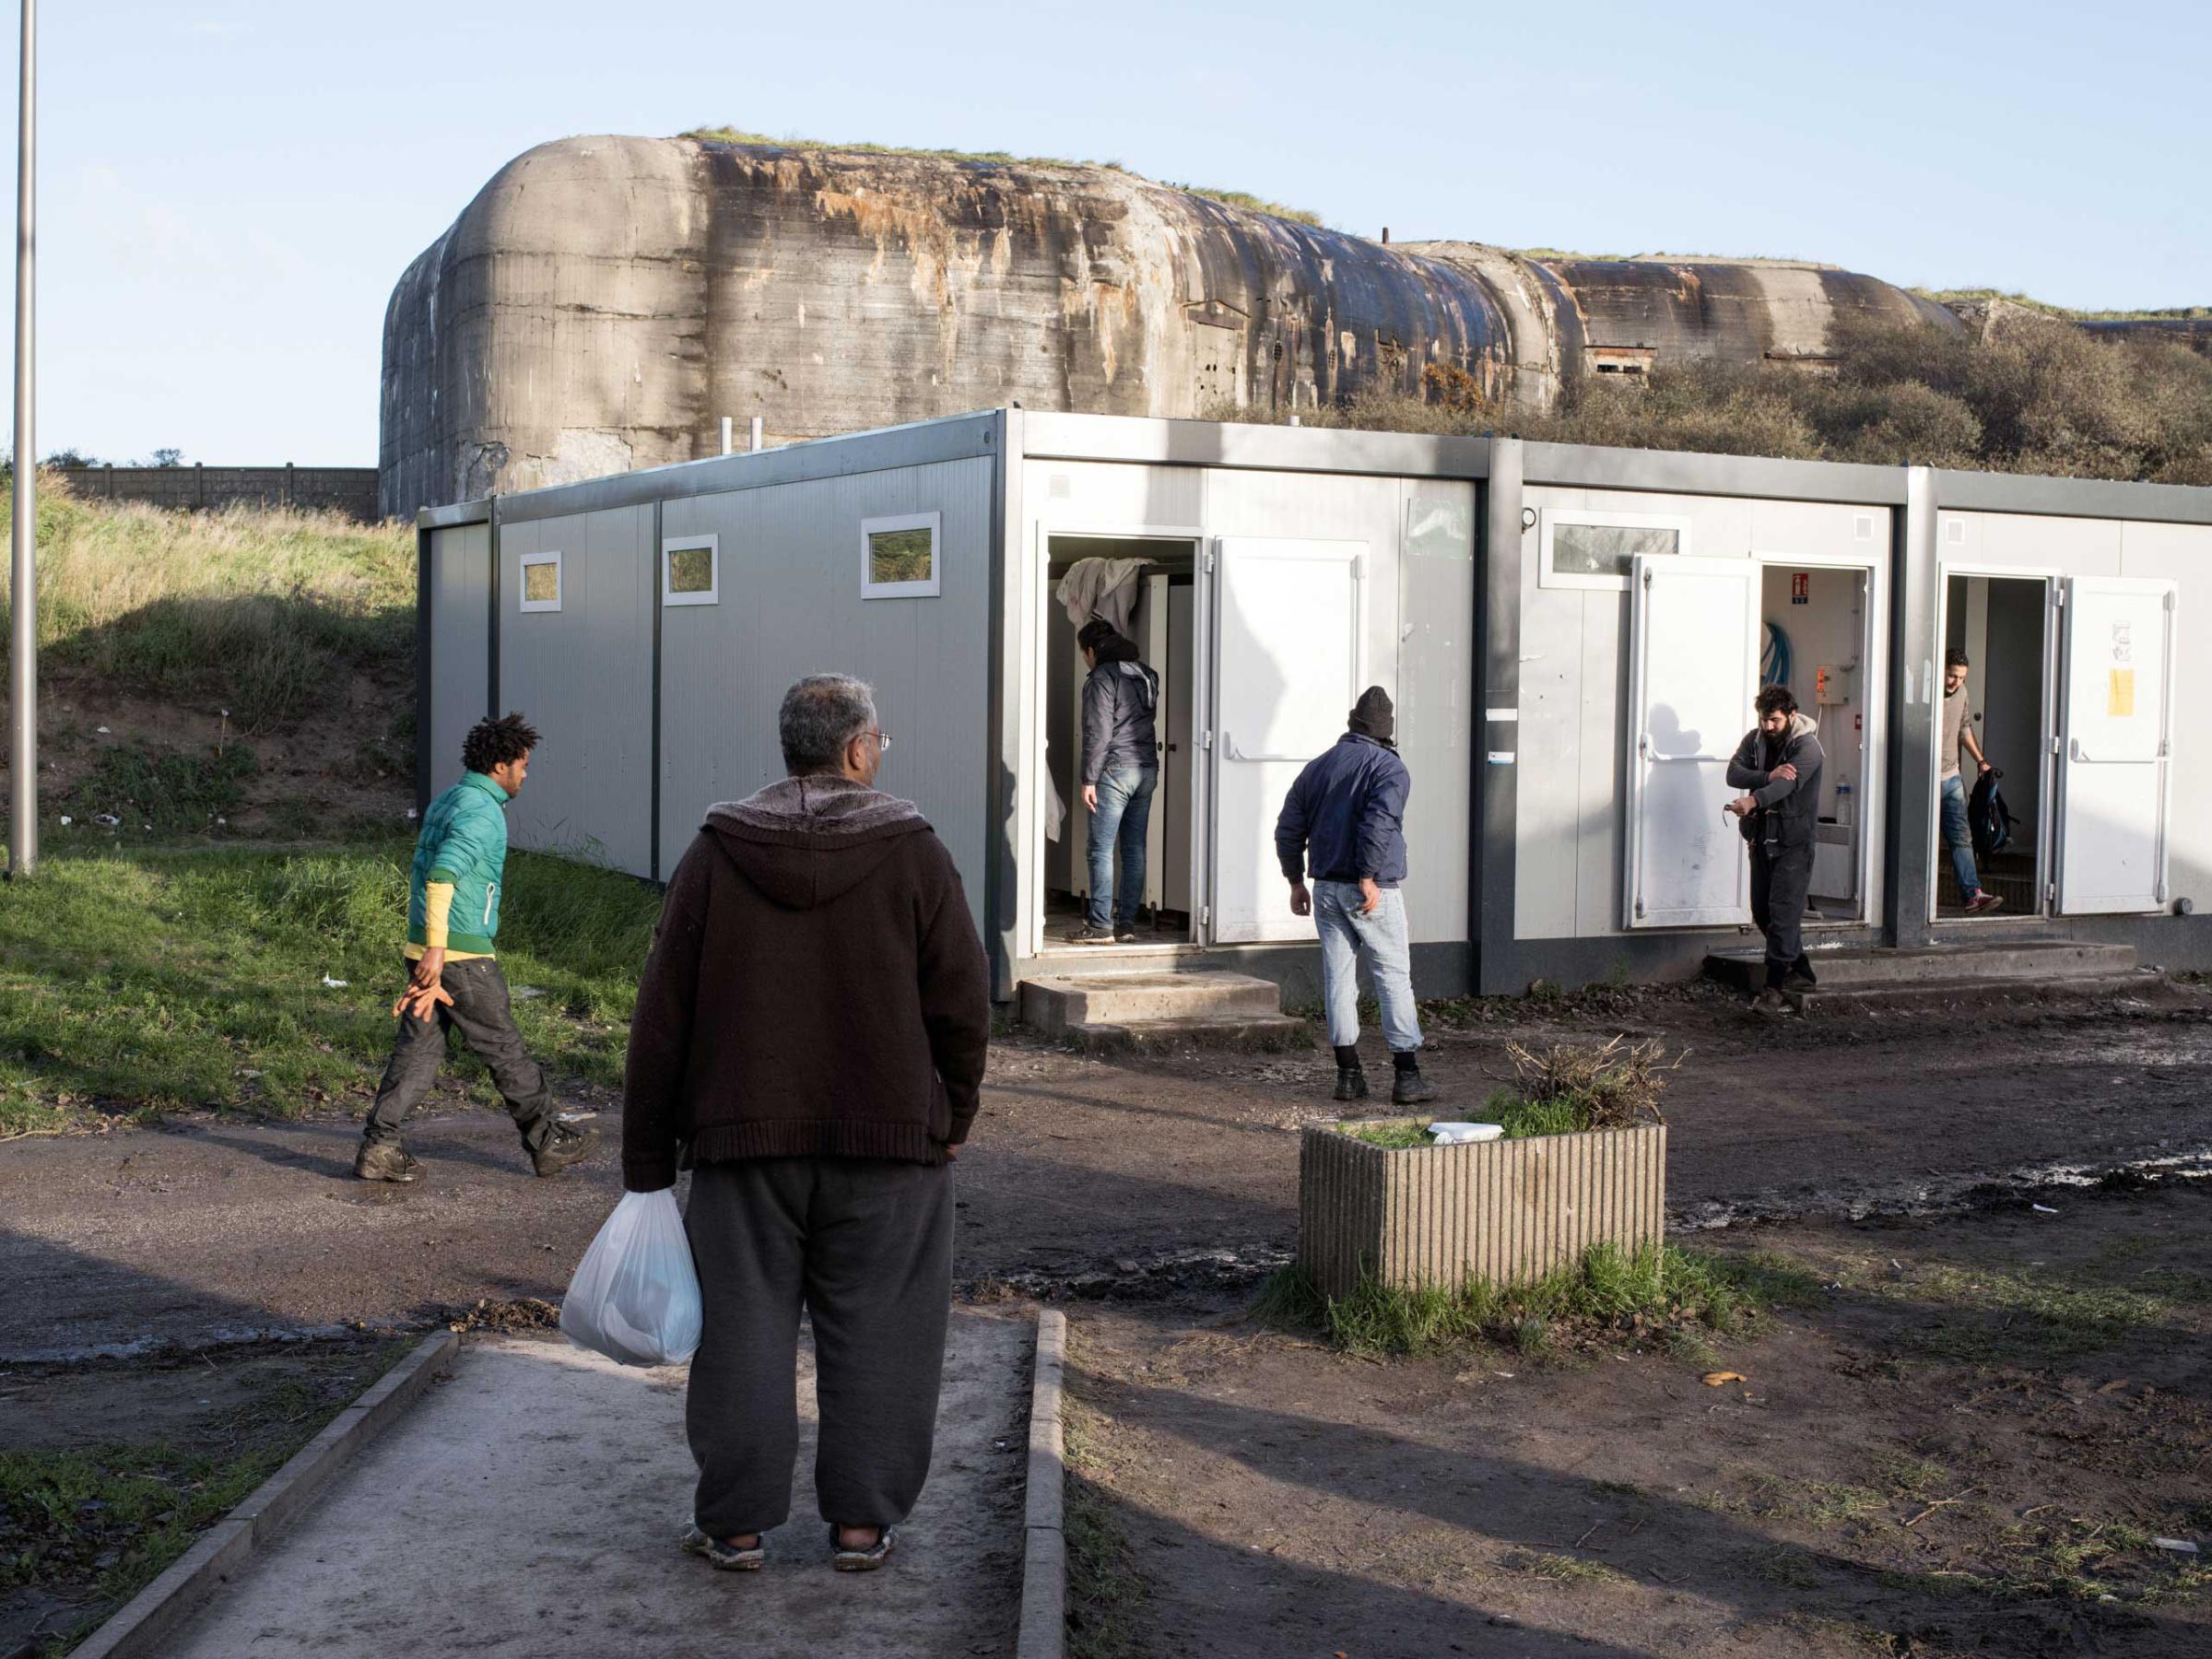 Facilities, including showers and mobile phone rechargers, are available to migrants during the day at the Jules Ferry Center in Calais, France, Nov. 25, 2015.